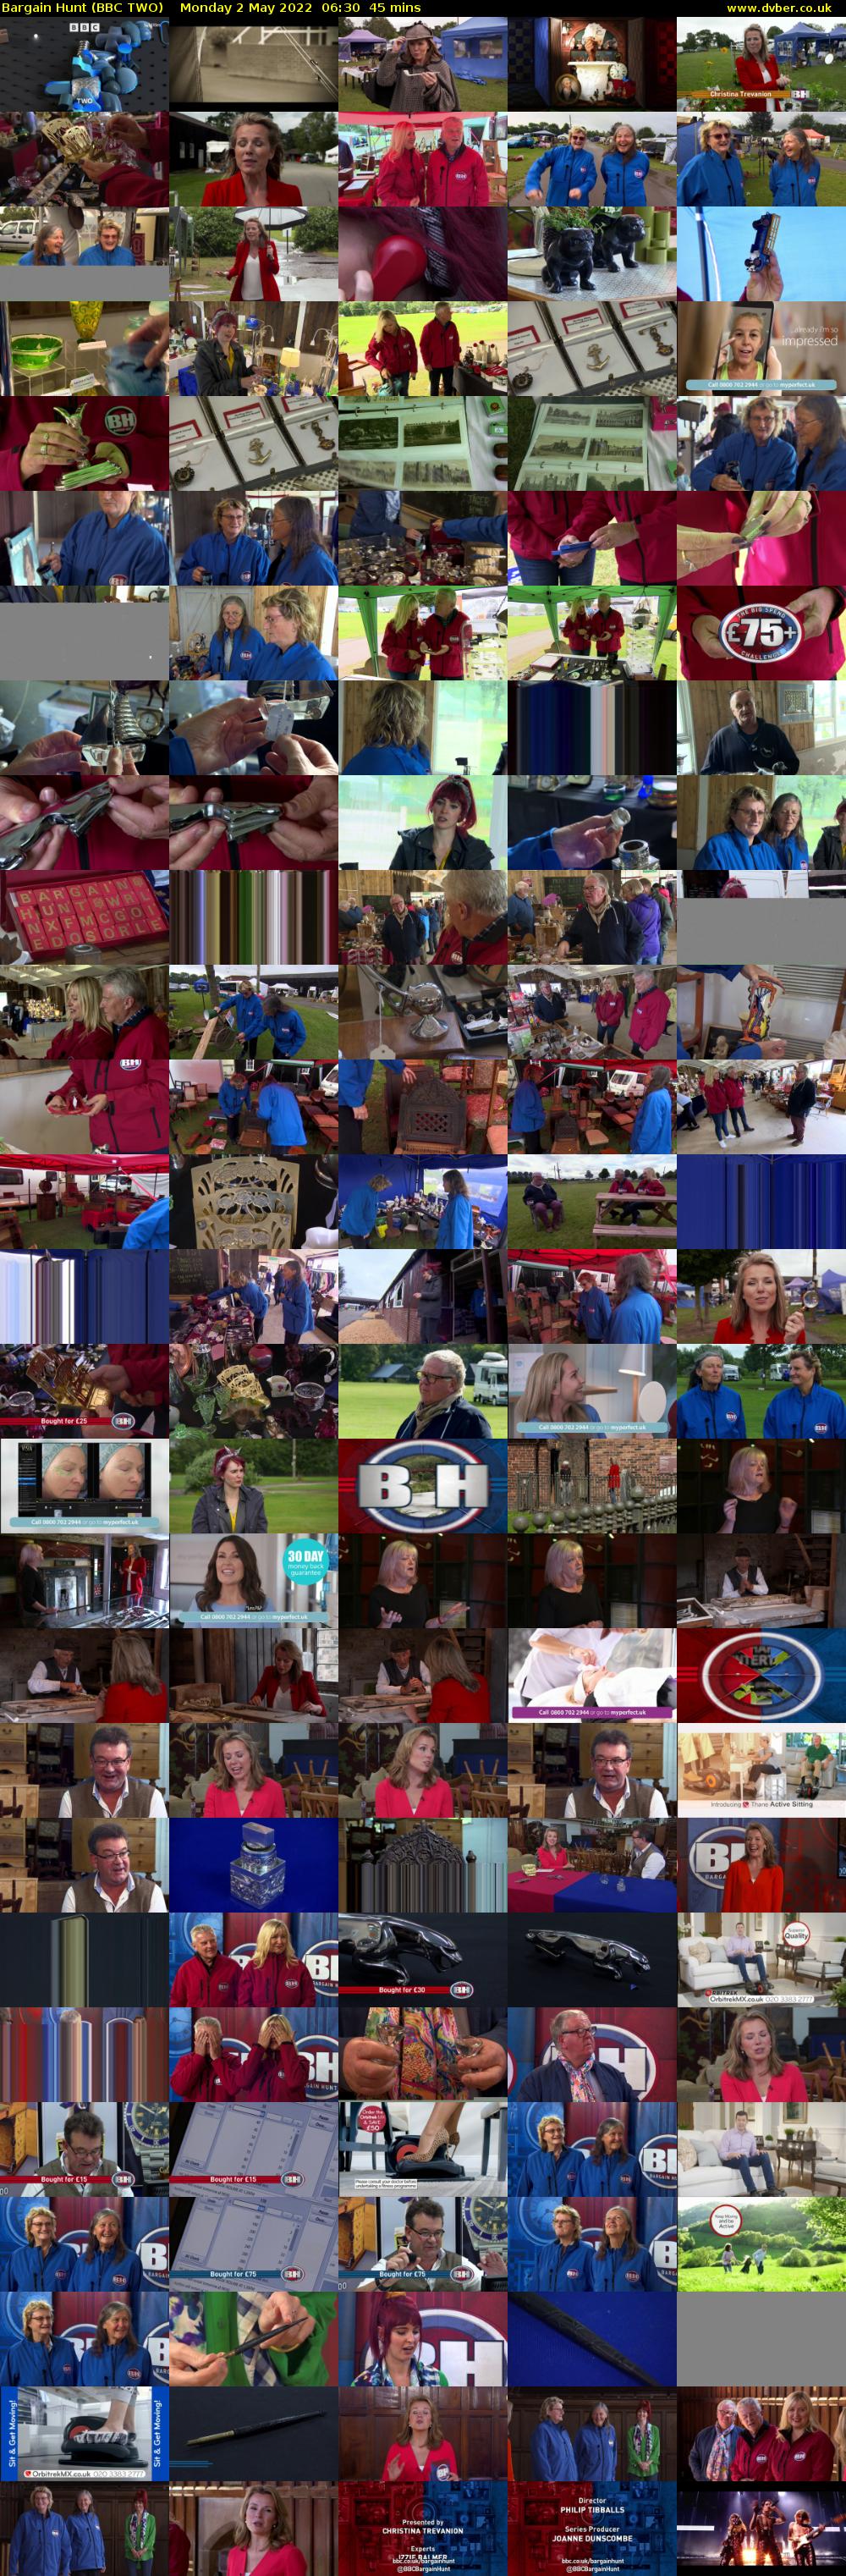 Bargain Hunt (BBC TWO) Monday 2 May 2022 06:30 - 07:15